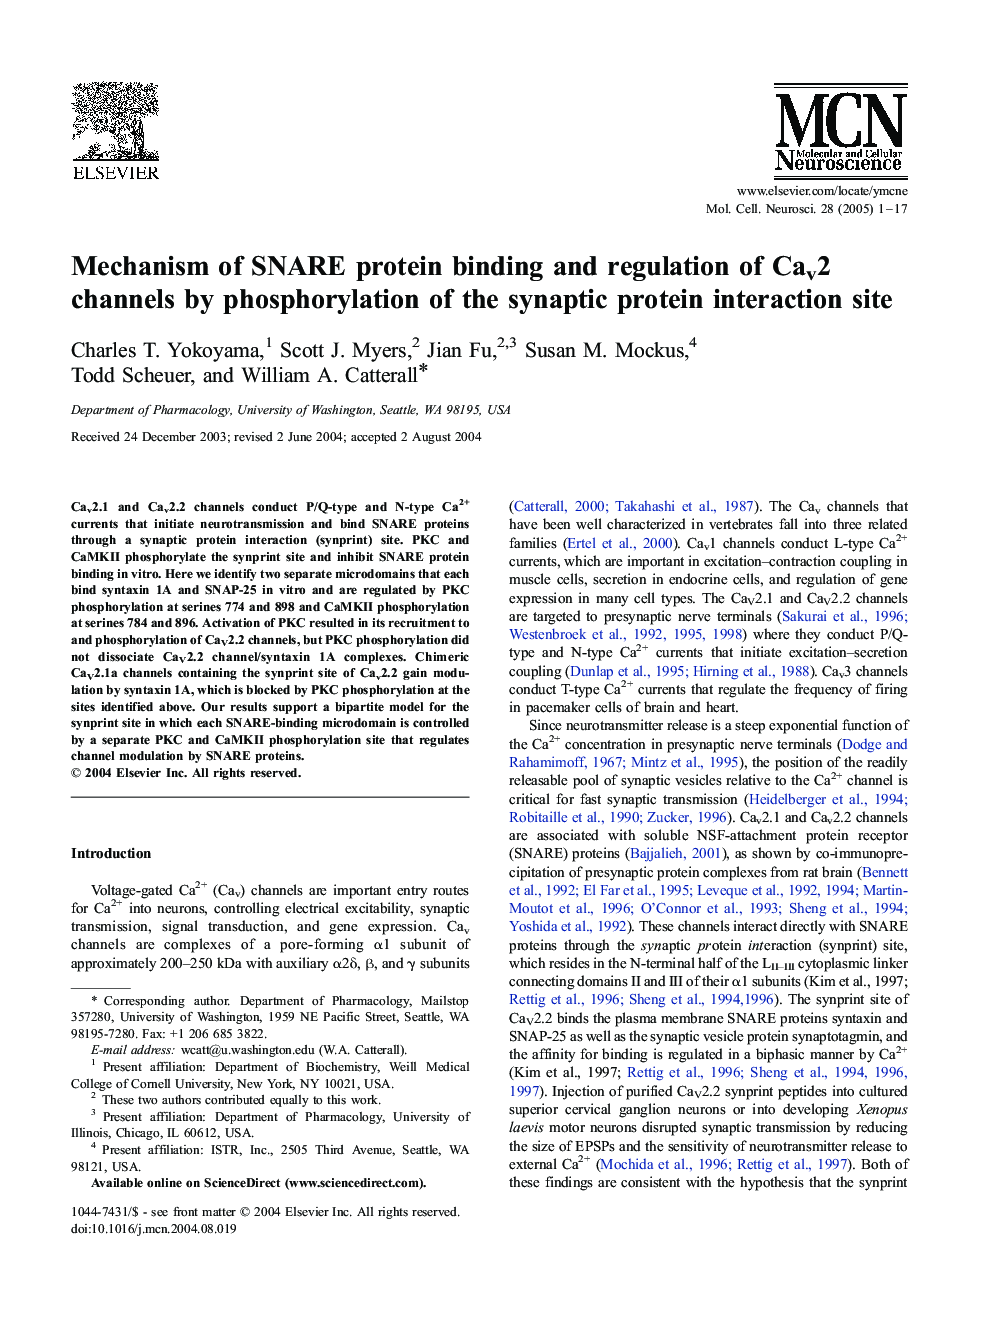 Mechanism of SNARE protein binding and regulation of Cav2 channels by phosphorylation of the synaptic protein interaction site